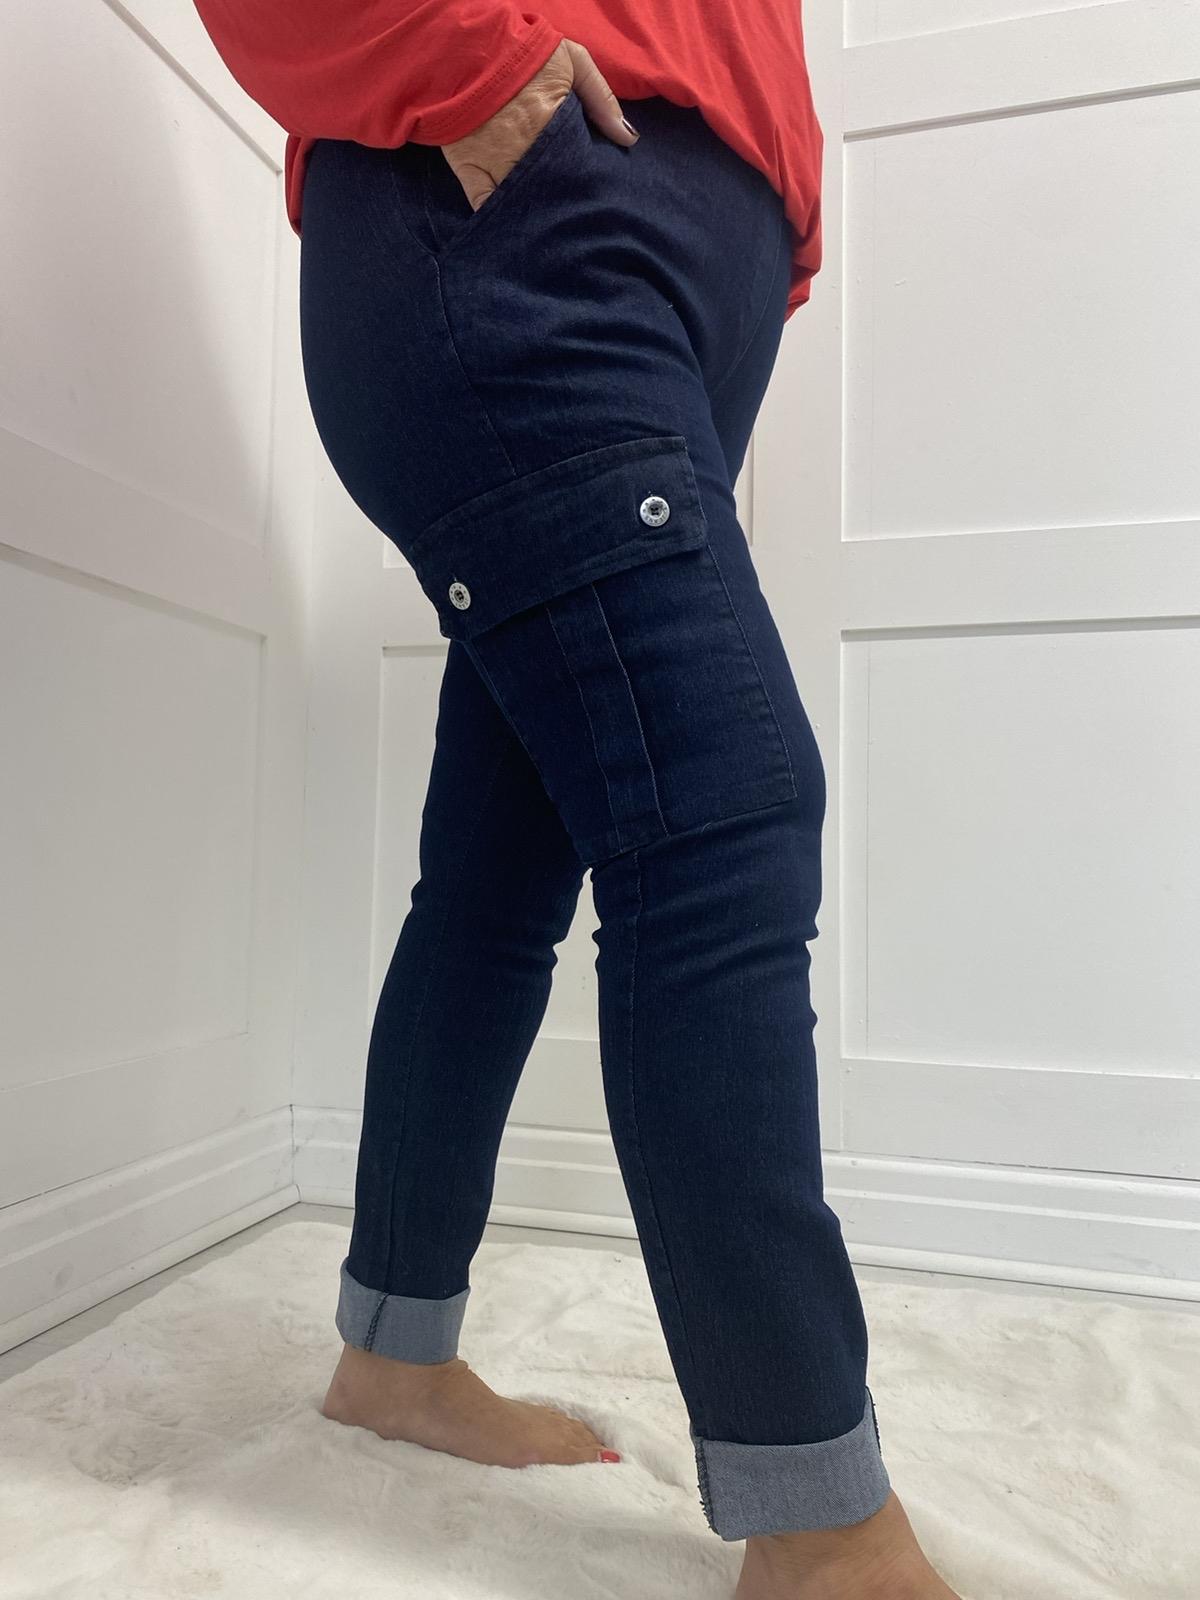 Cherry: Denim cargo stretchy high waisted trousers. 2 sizes